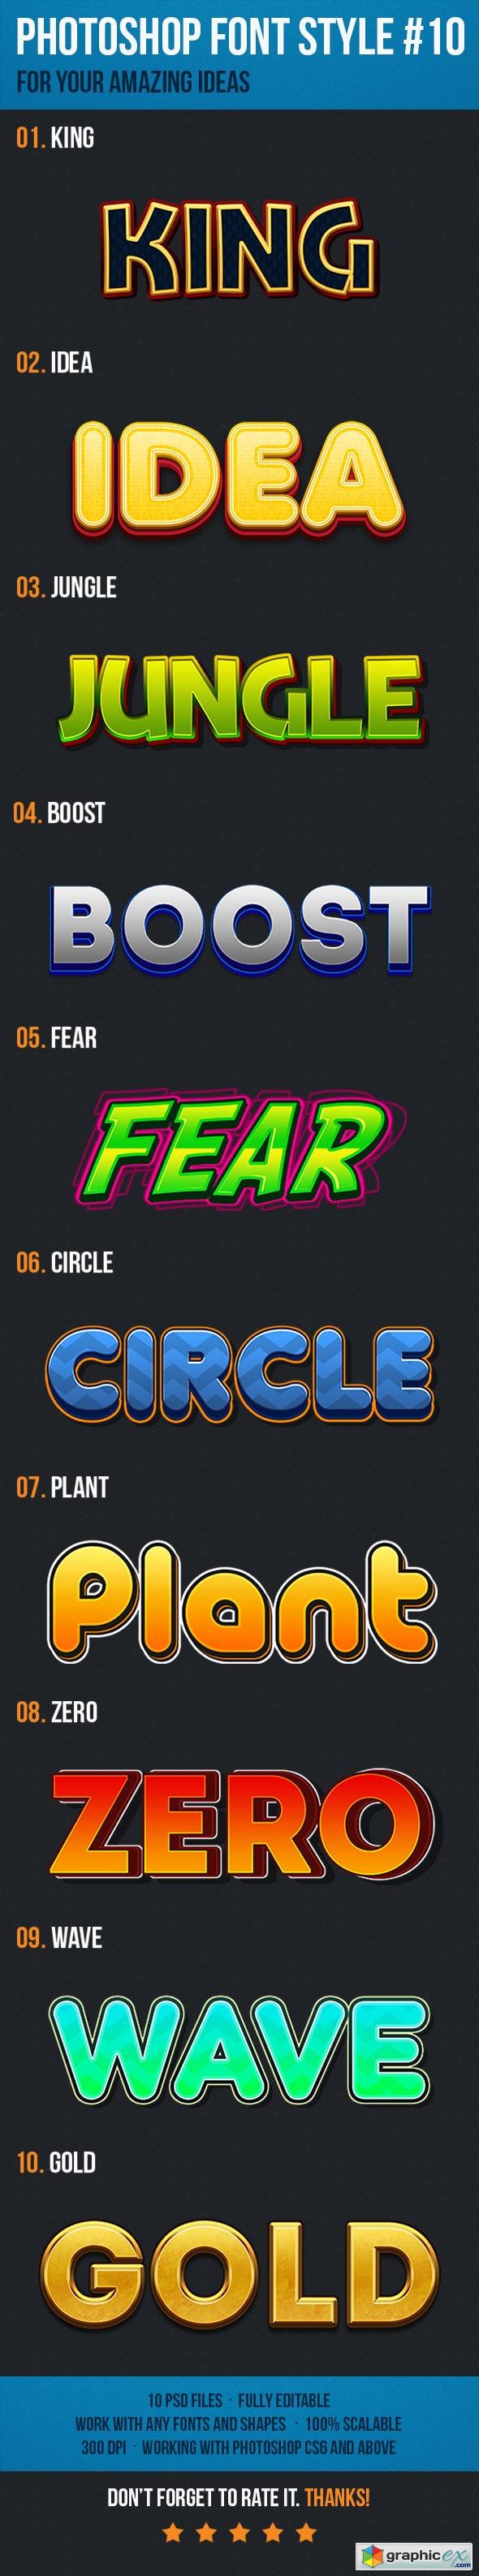 10 Font Style for Game Logo #10